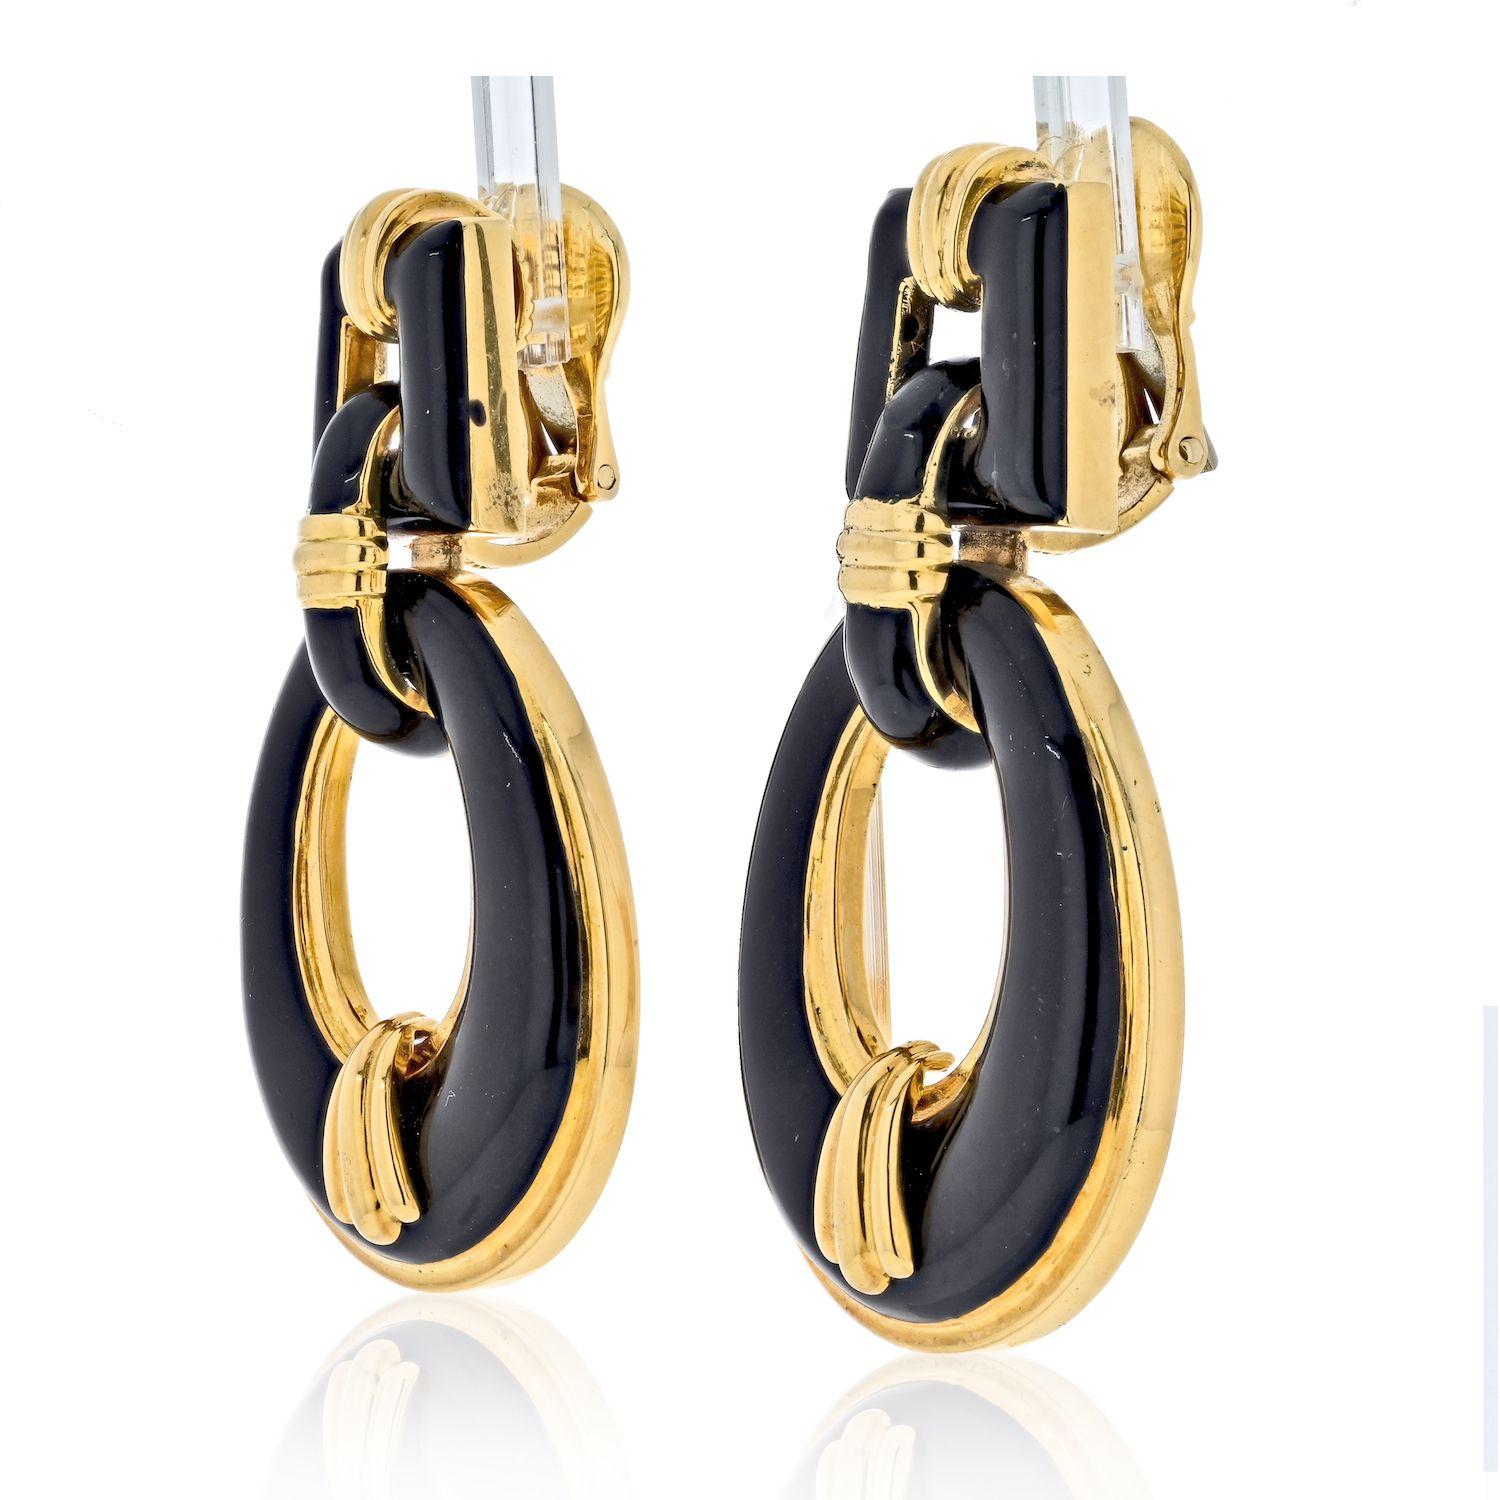 The earrings are designed in an articulated 'door knocker' motif, the open oval drops are suspended from a rectangular shaped element and suited with omega backs for fastening clips and the posts option for pierced ears can be easily added.
David